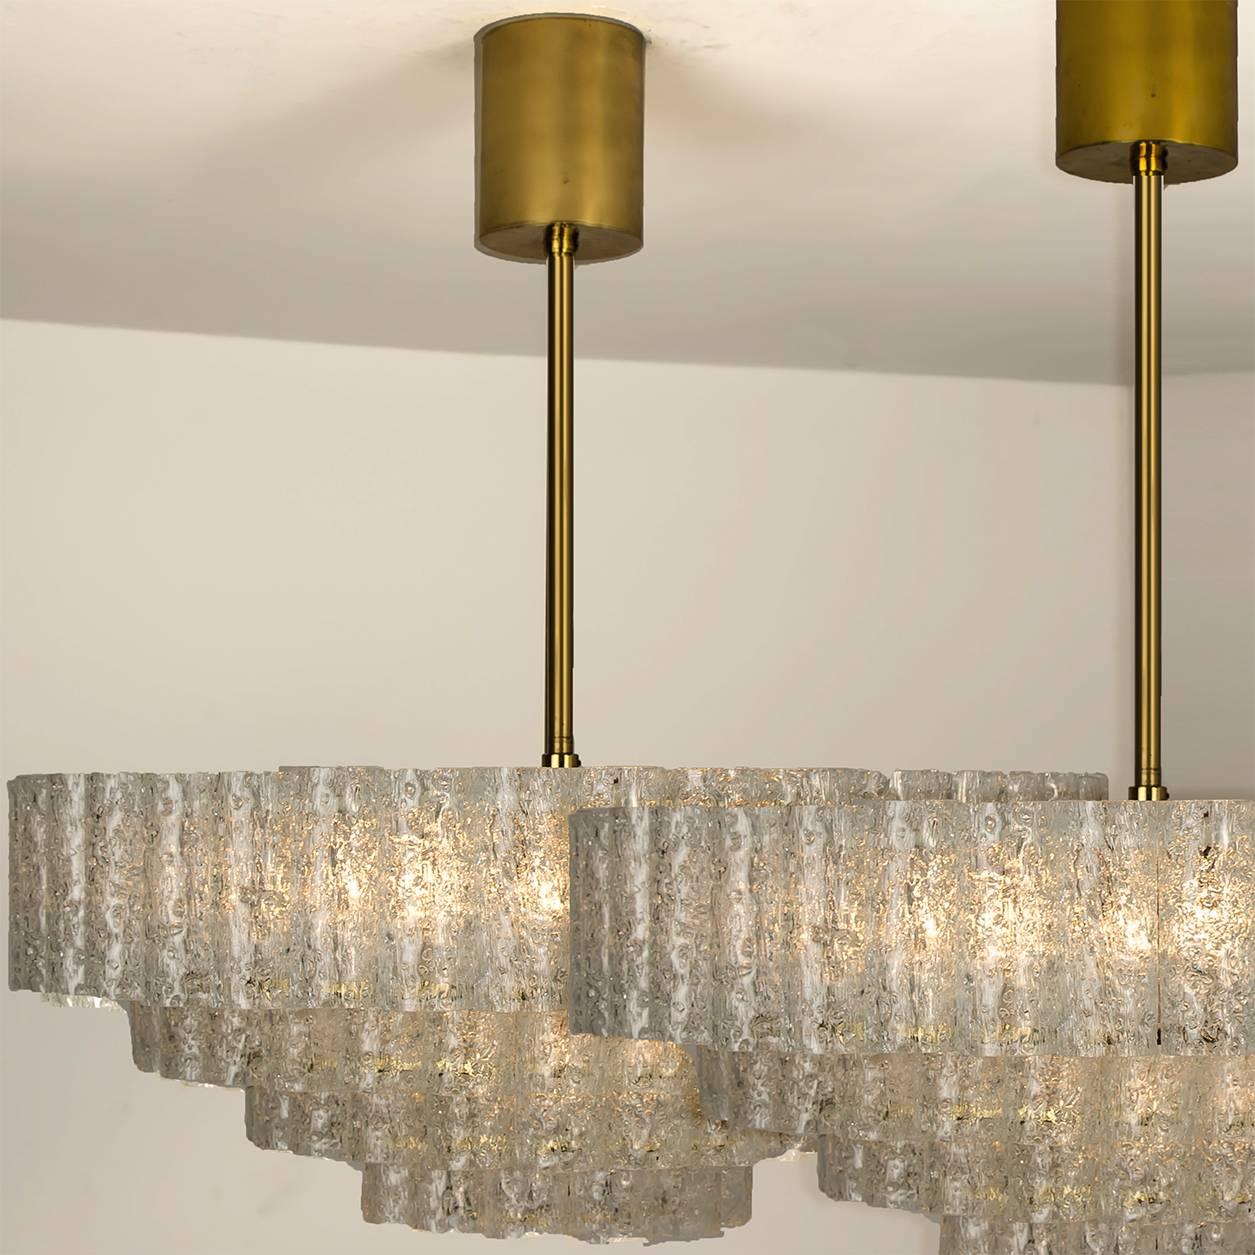 Set of Three Large Glass Brass Light Fixtures by Doria, Germany, 1969 For Sale 4